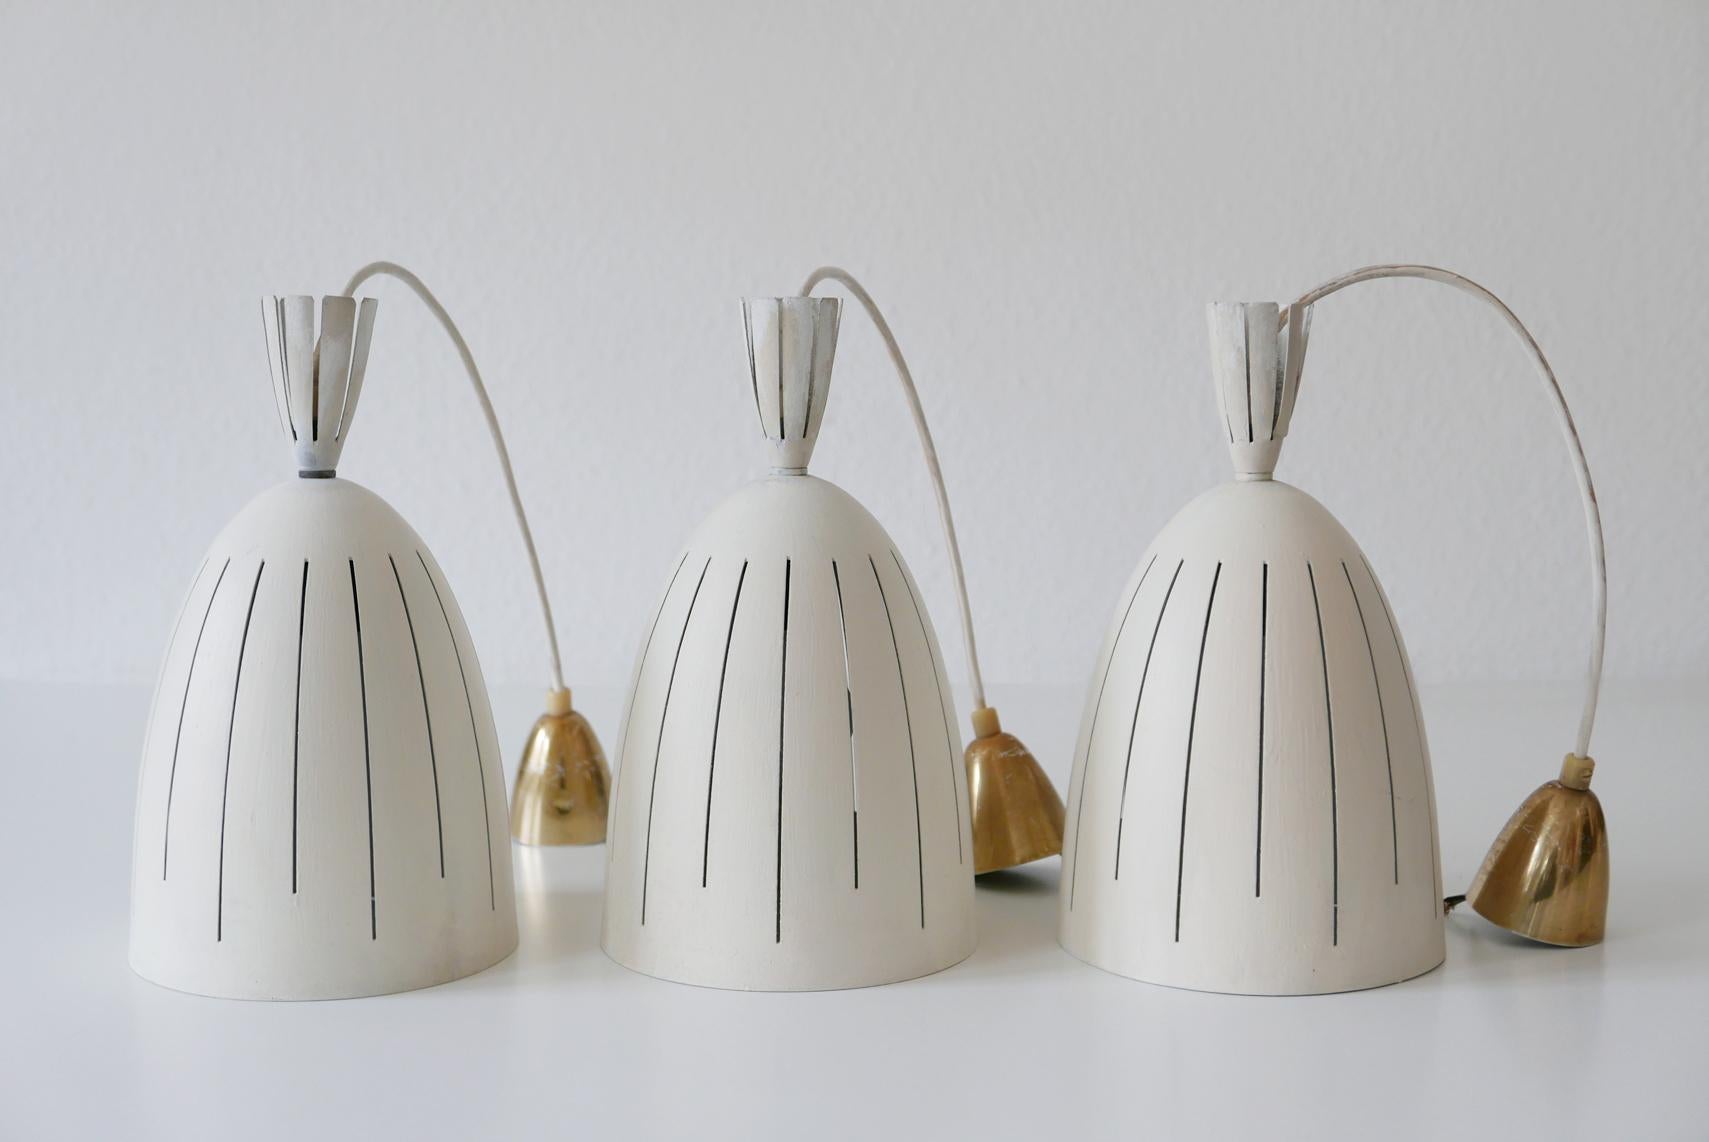 Set of Three Lovely Mid-Century Modern Diabolo Pendant Lamps, 1950s, Germany For Sale 12